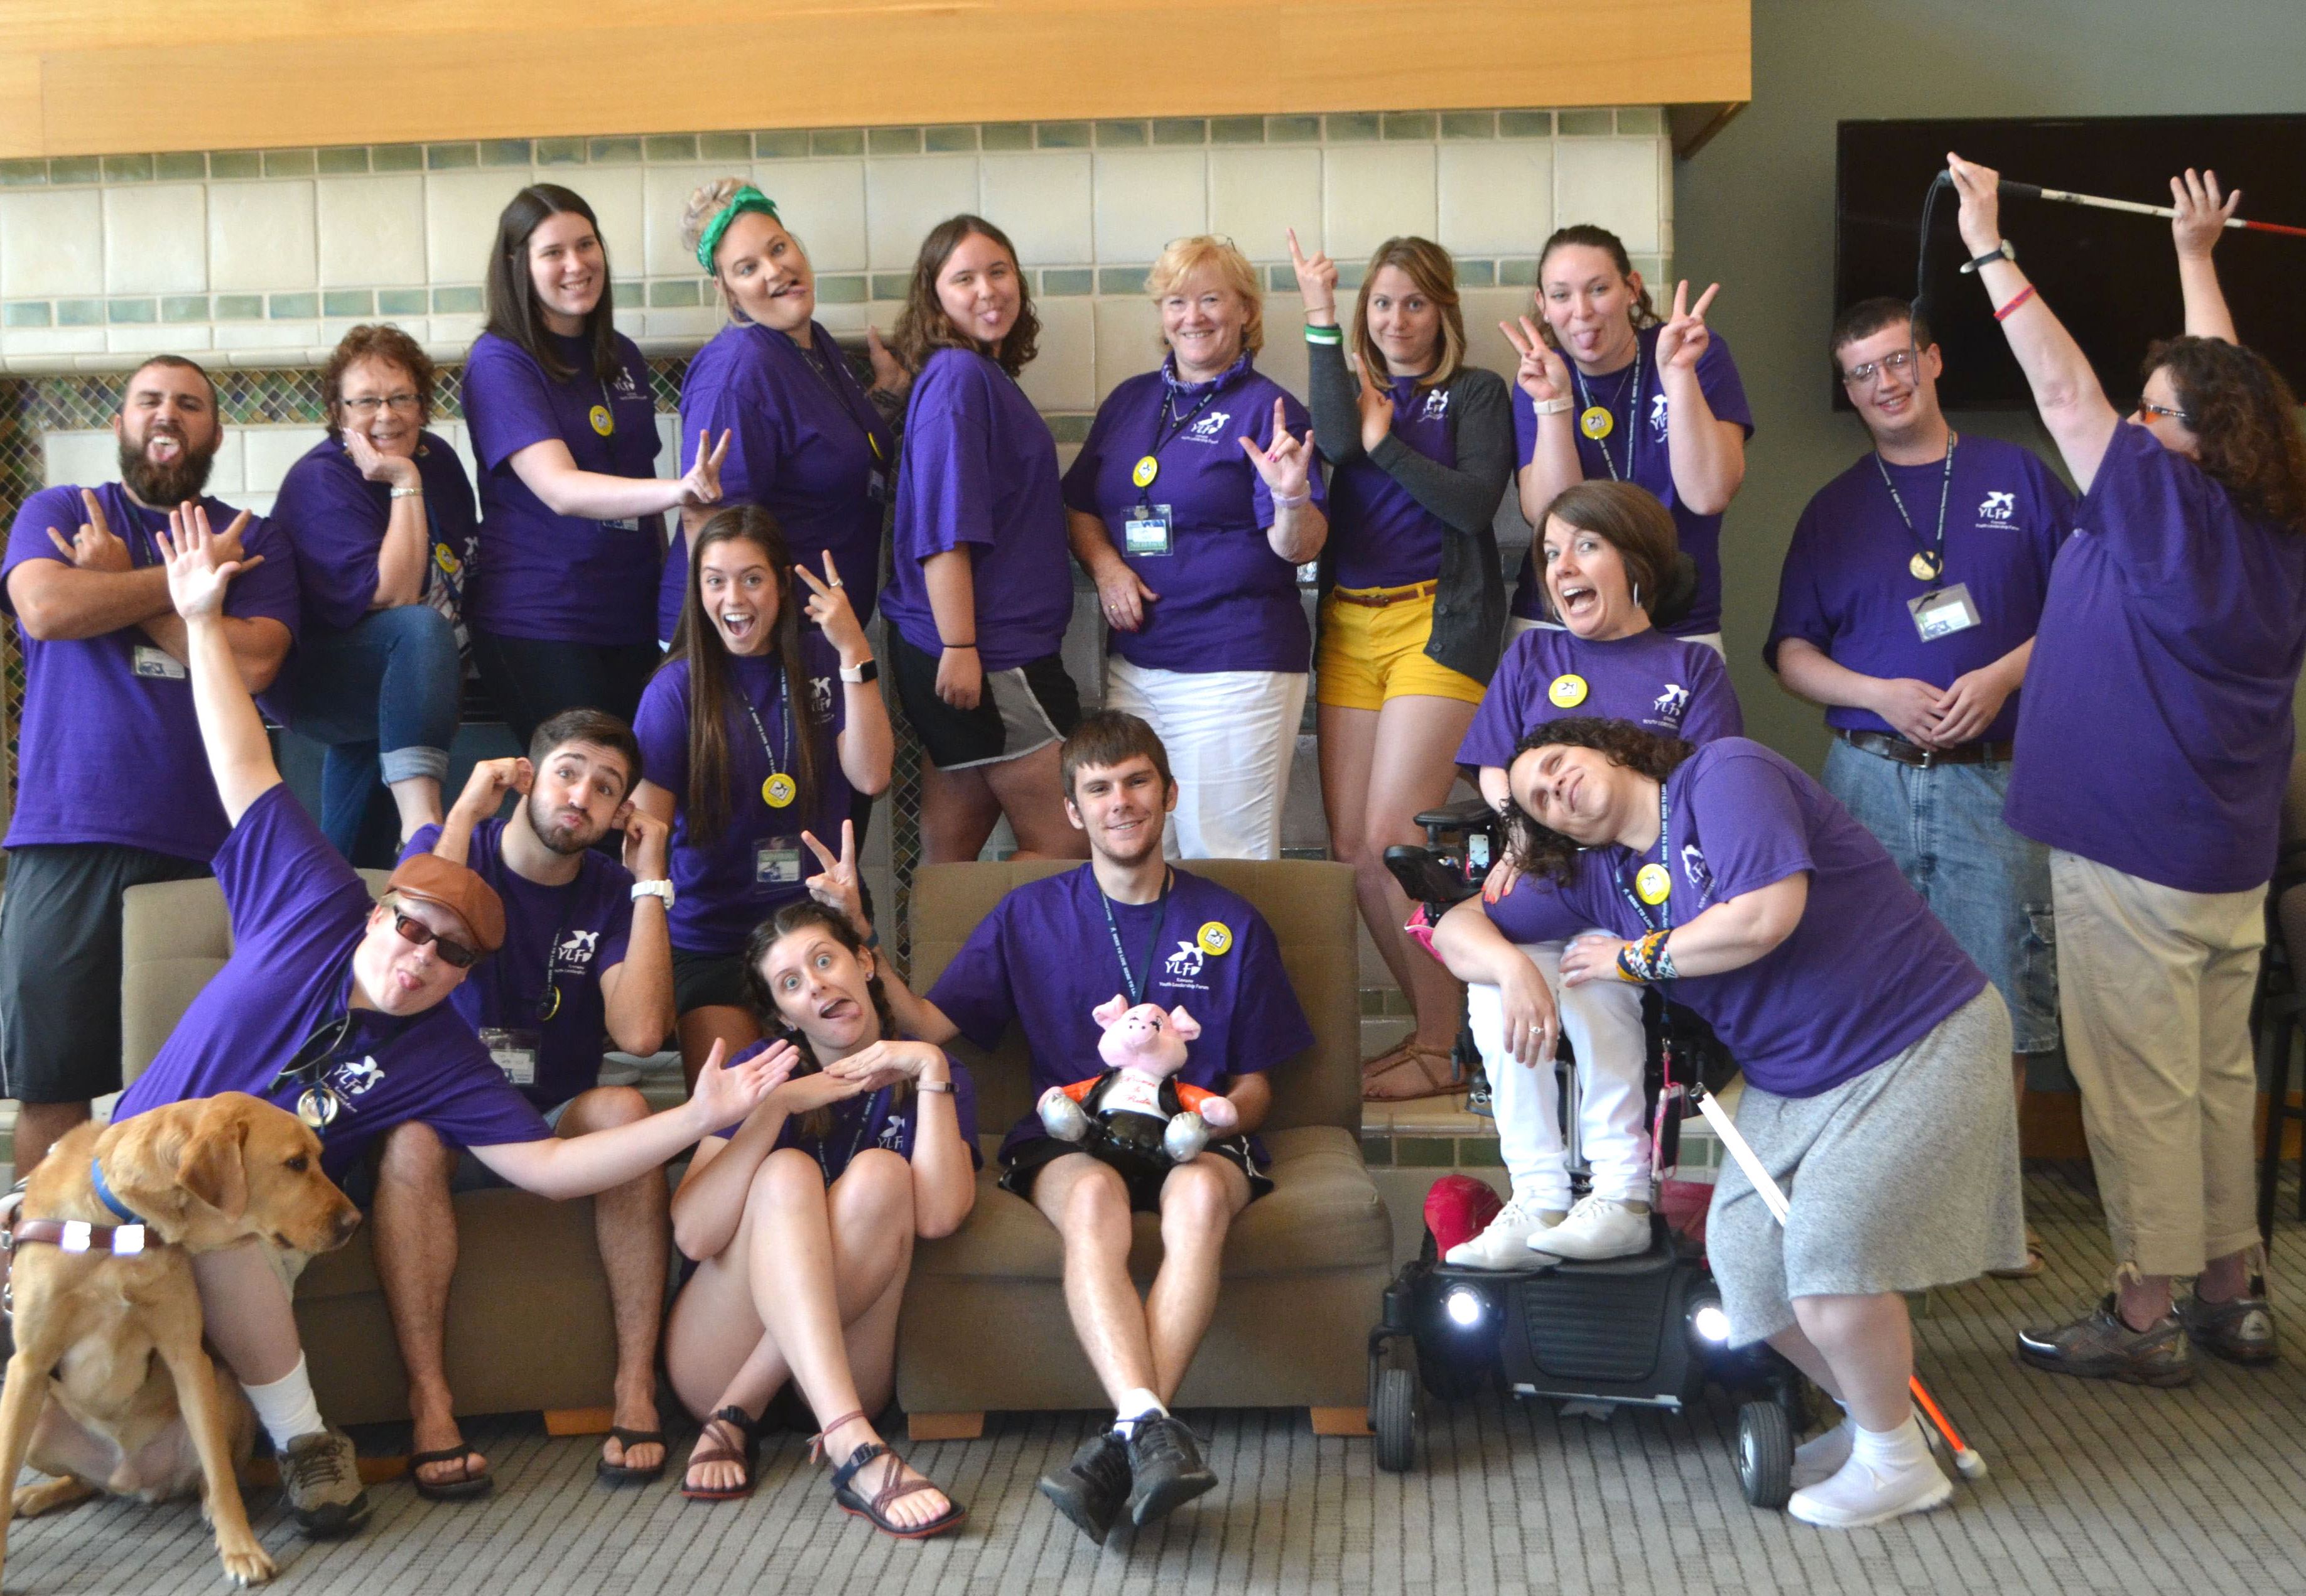 A group of KSYLF volunteers wearing purple shirts take a silly group photo.